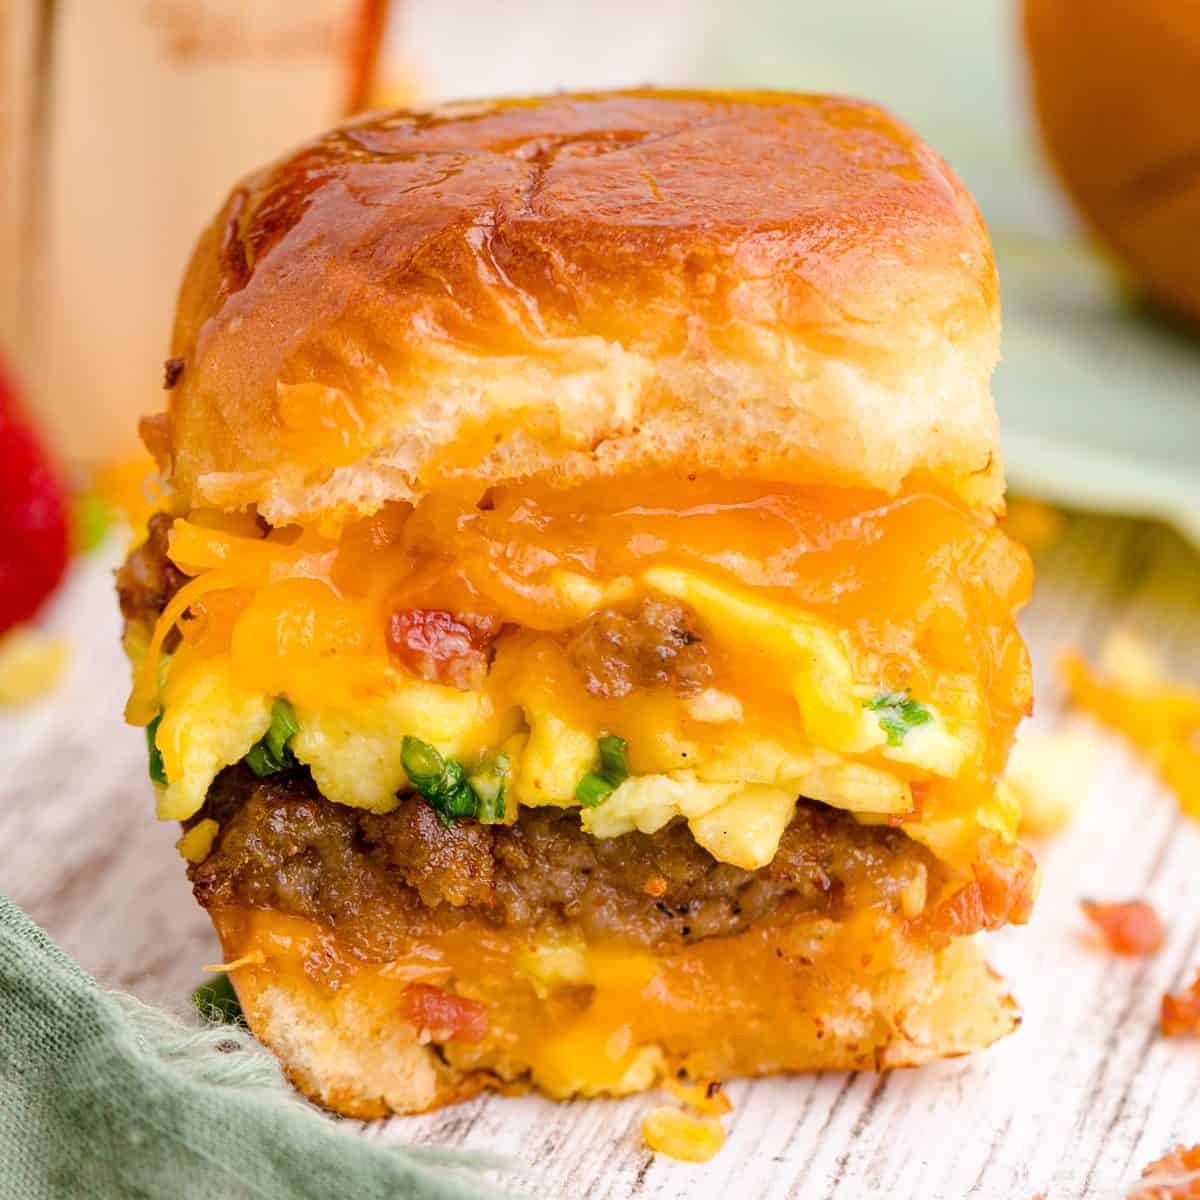 Sausage, Egg and Cheese Breakfast Sliders